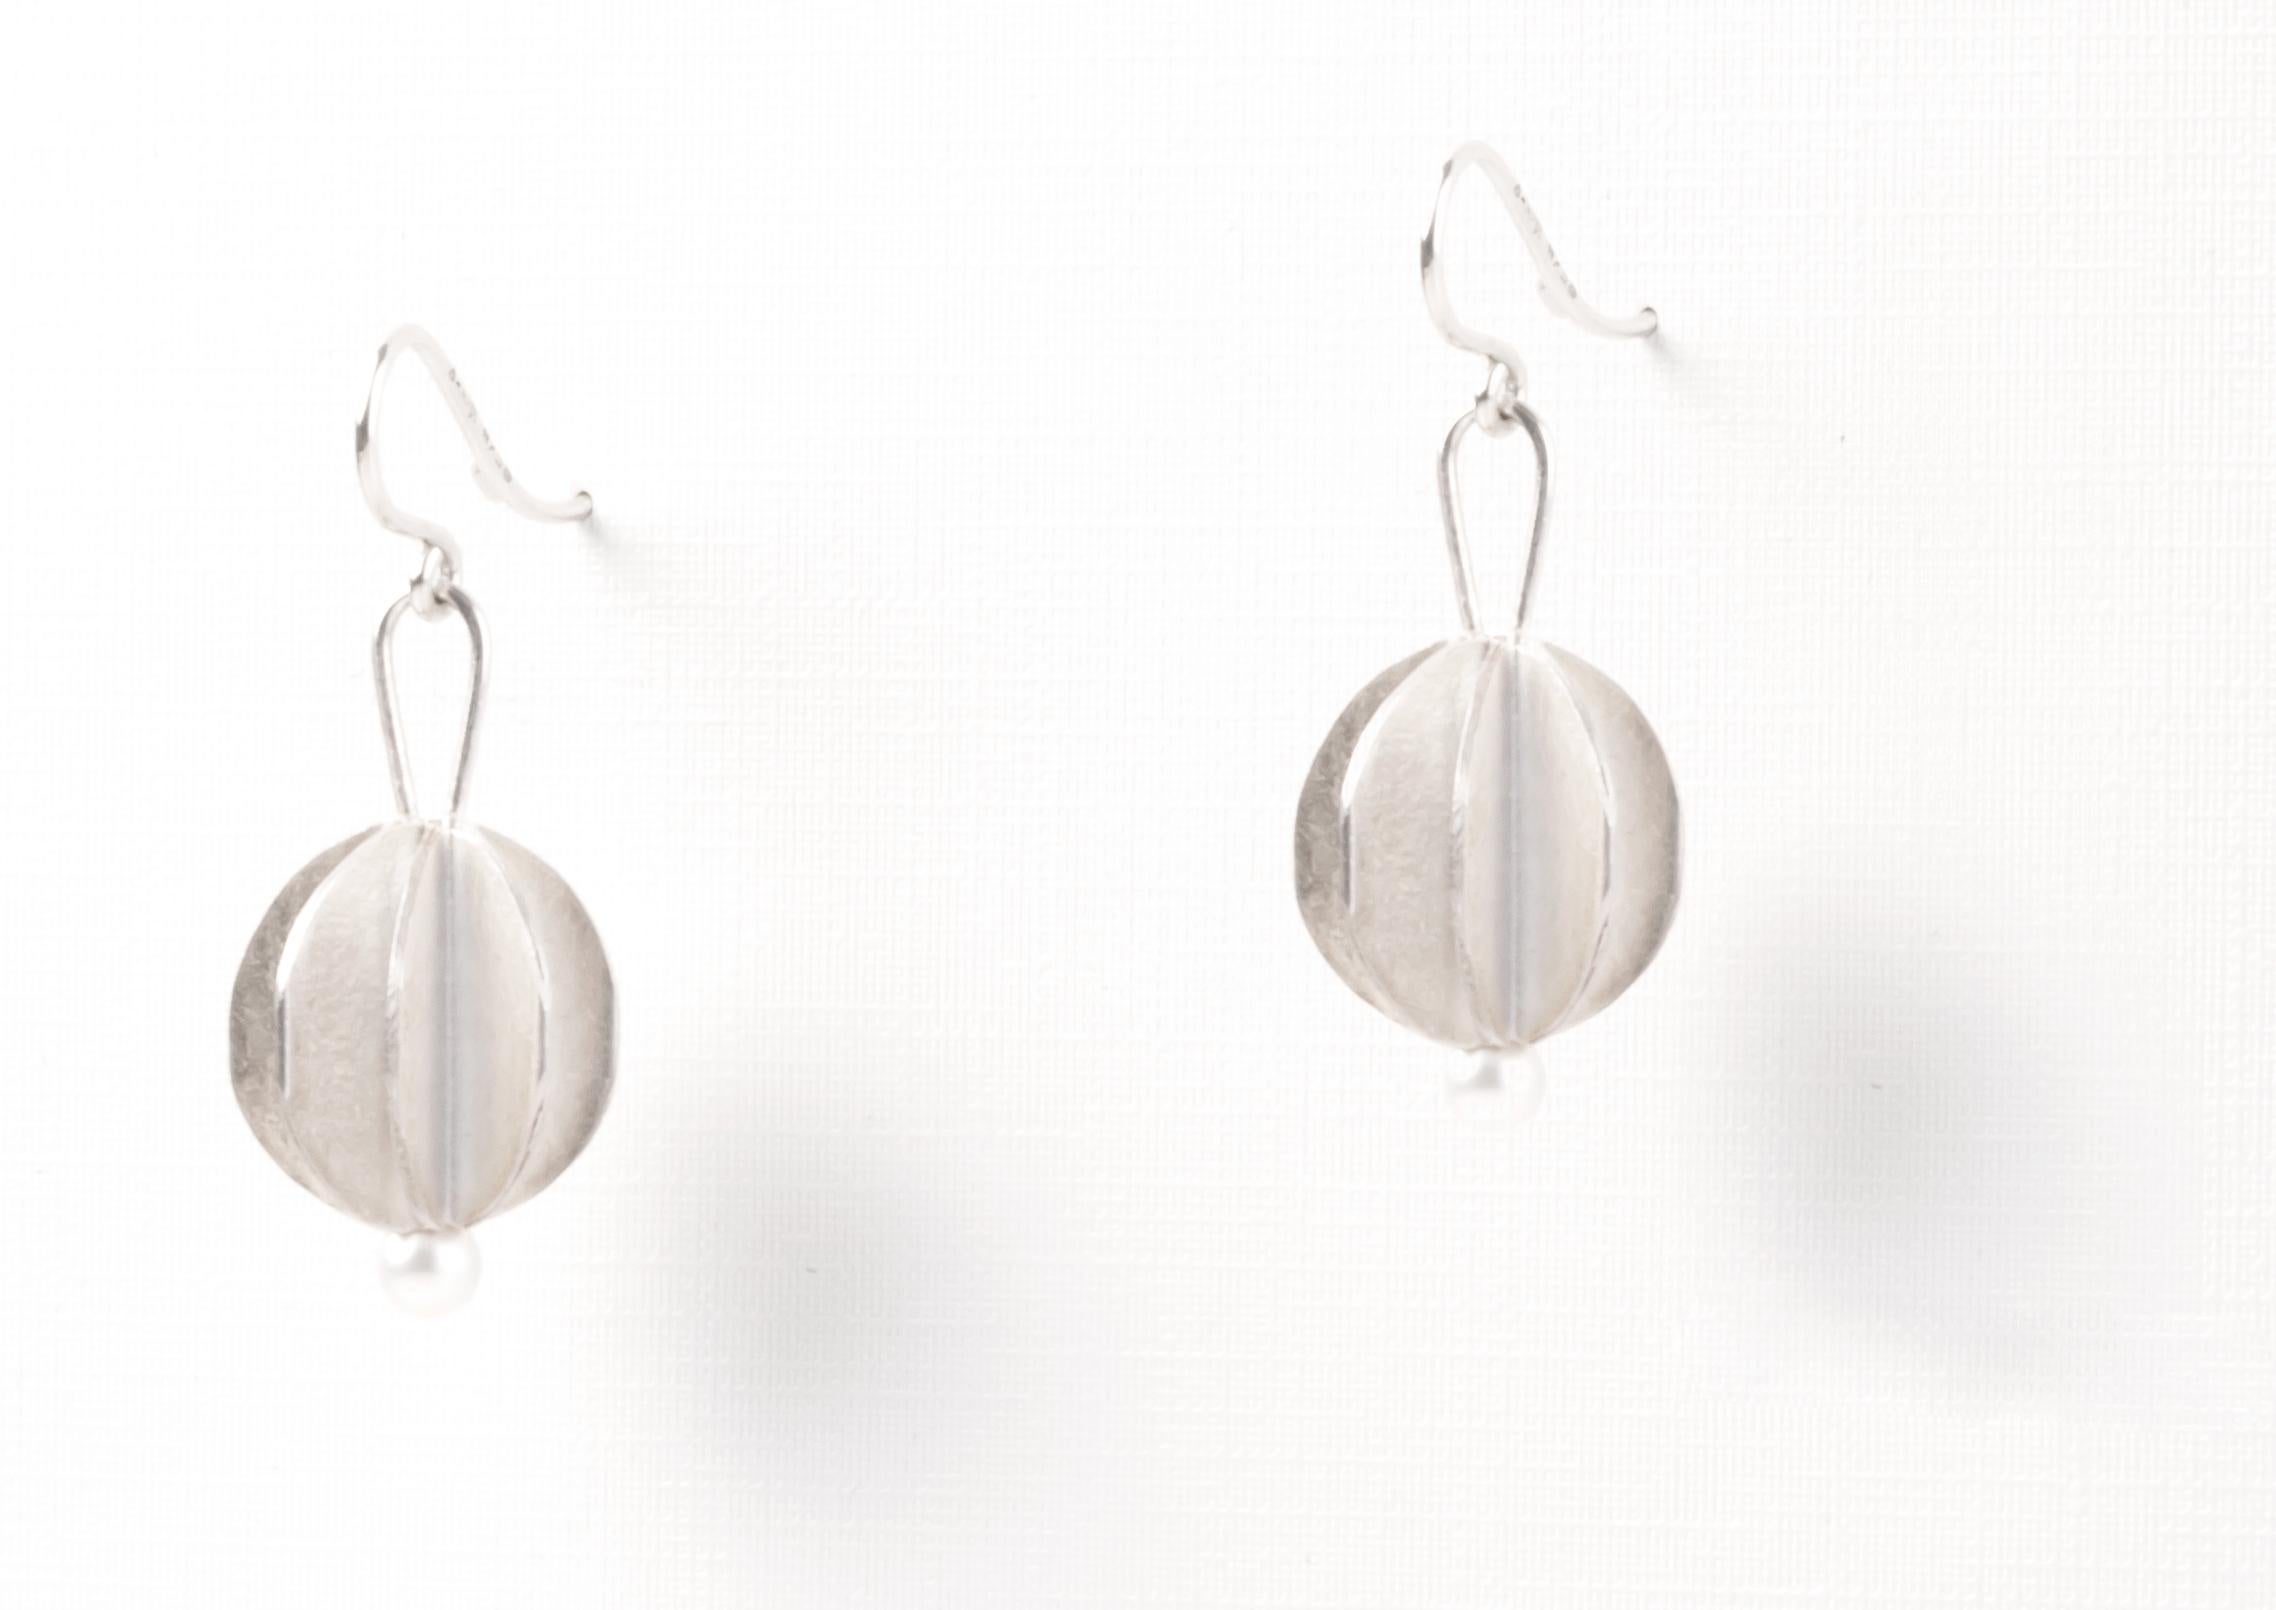 Wonderful and decorative pair of silver and pearl earrings. Designed and hand made in her studio by silversmith Åse-Marit Thorbjørnsrud. Both earrings are in excellent condition. Quoted price is for the pair. 
